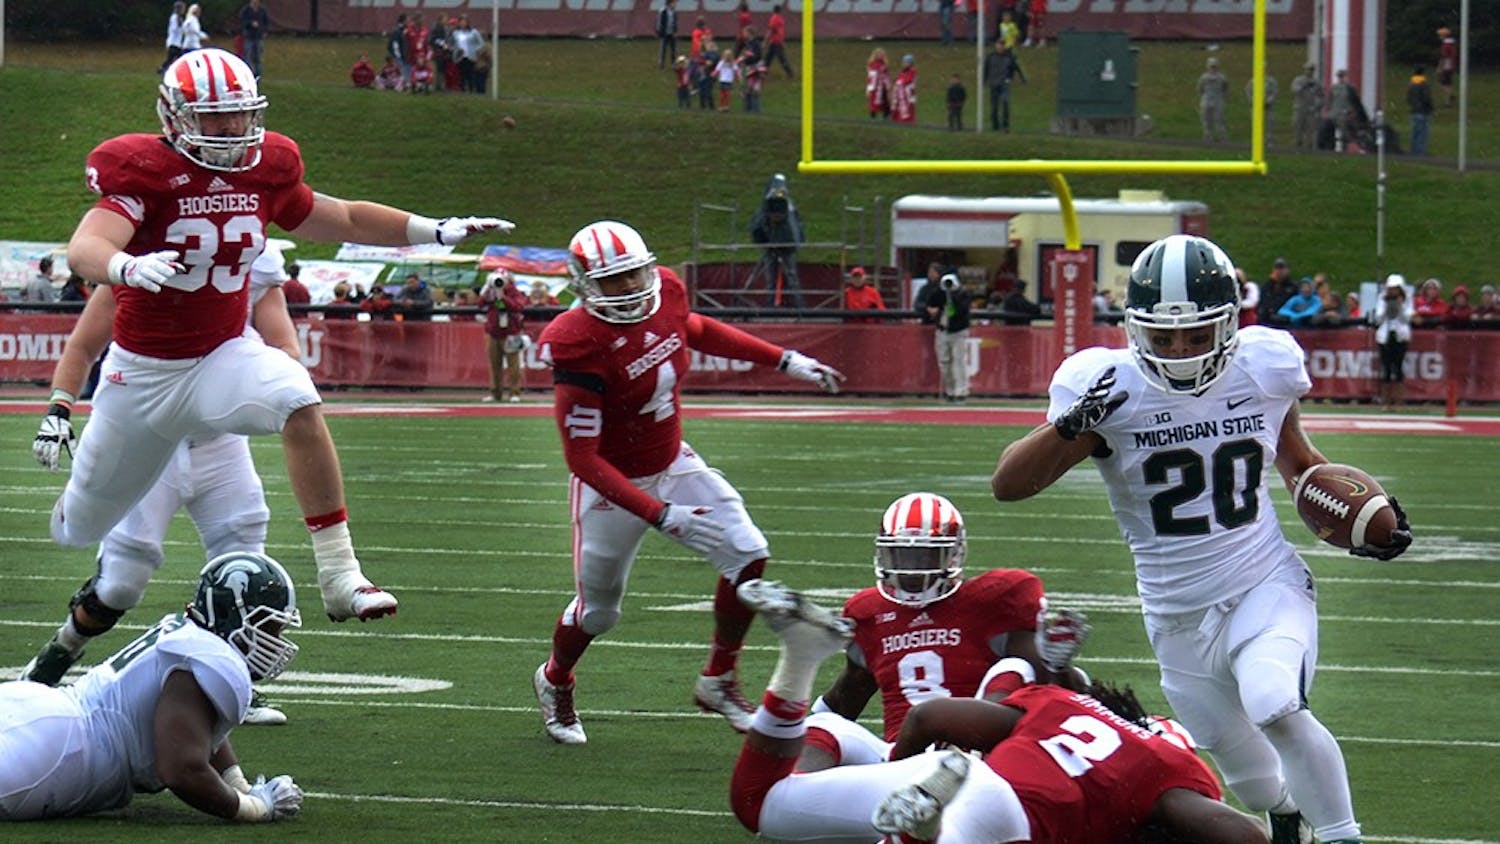 The IU defense tries to tackle Michigan State running back Nick Hill in the homecoming game against the Spartans on Saturday at Memorial Stadium.